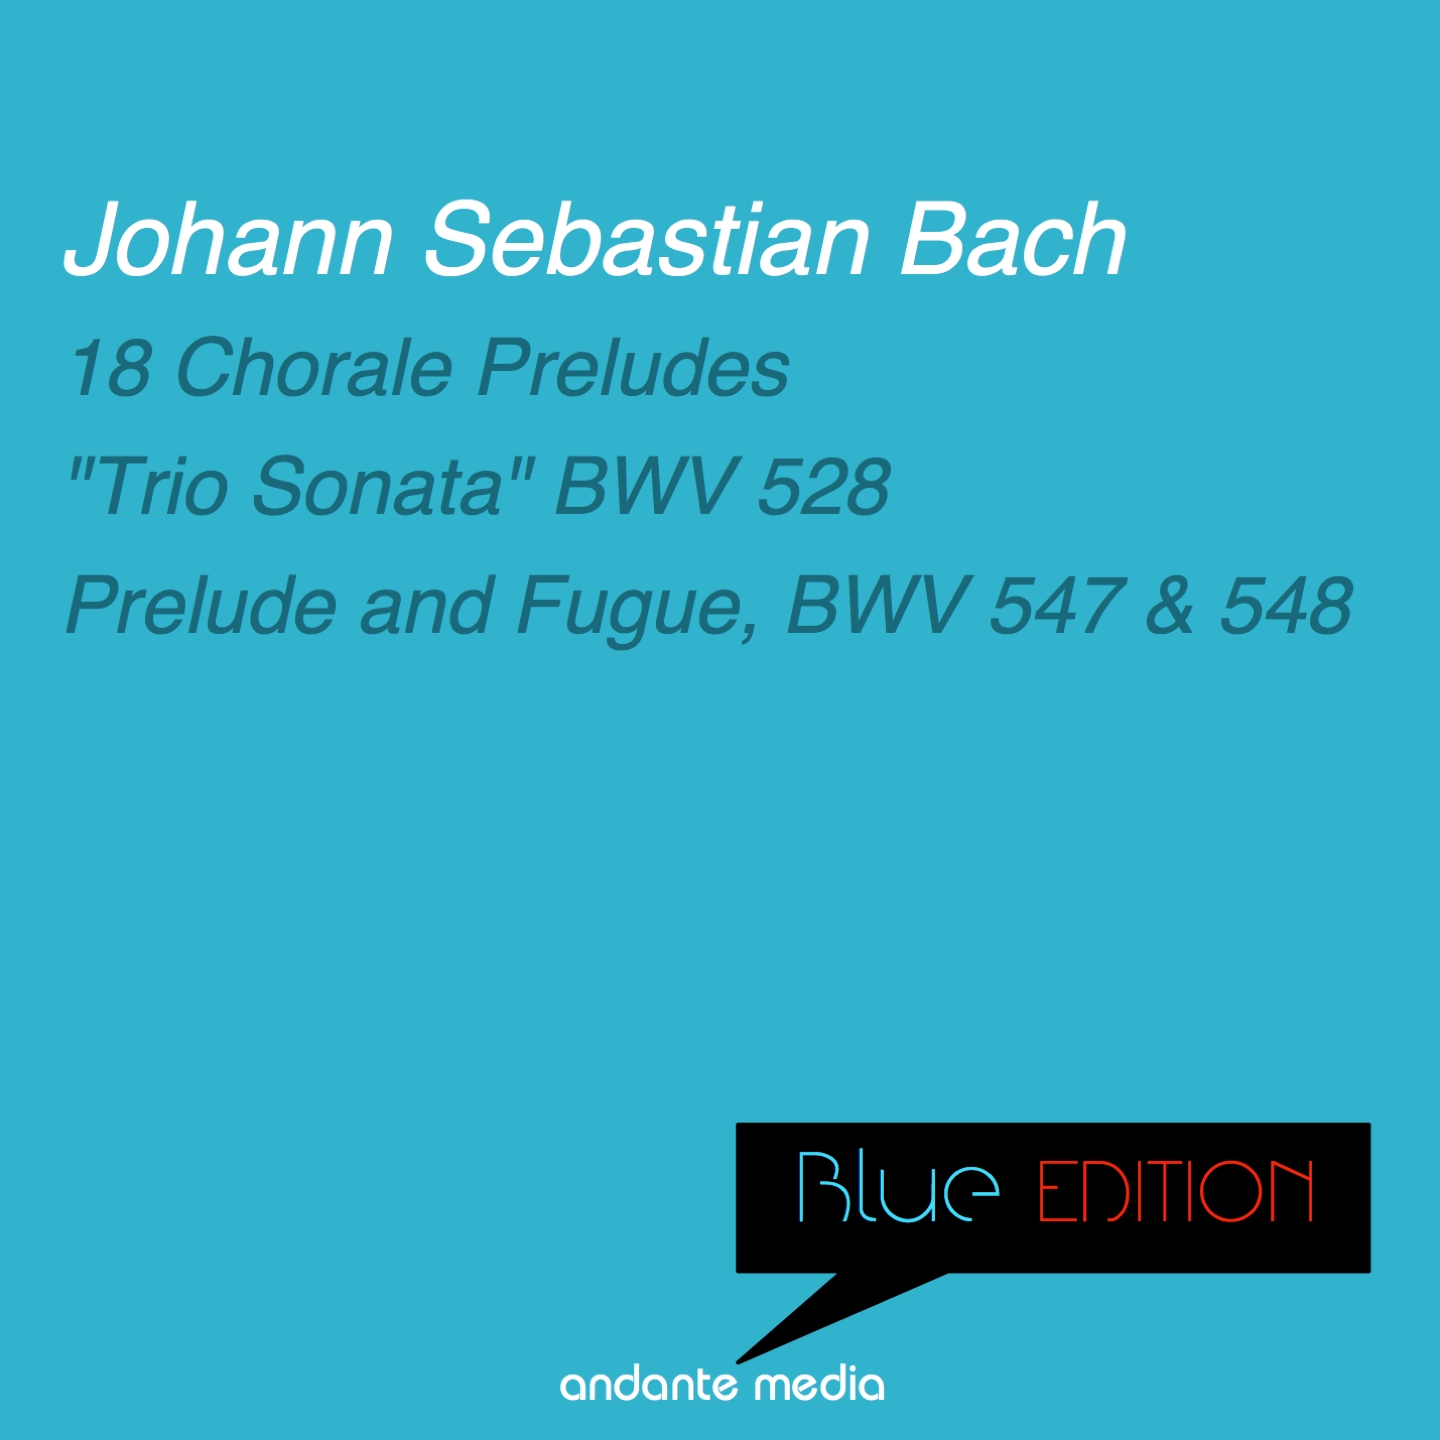 Prelude and Fugue in C Major, BWV 547